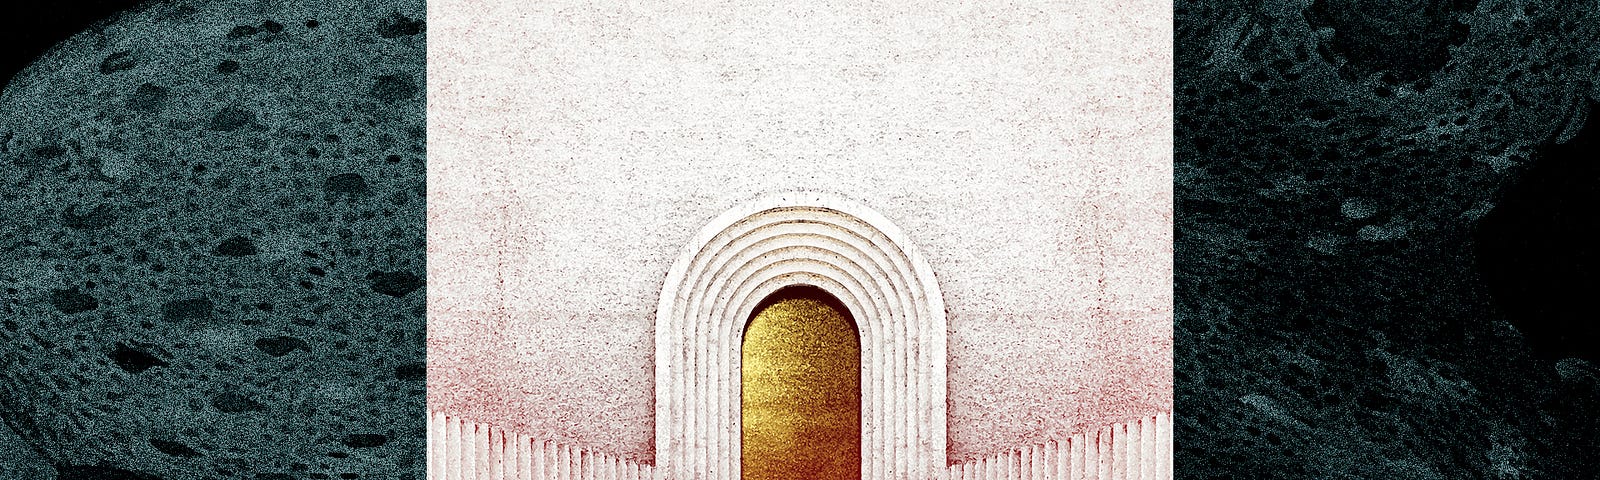 A golden door and steps on a swirling background